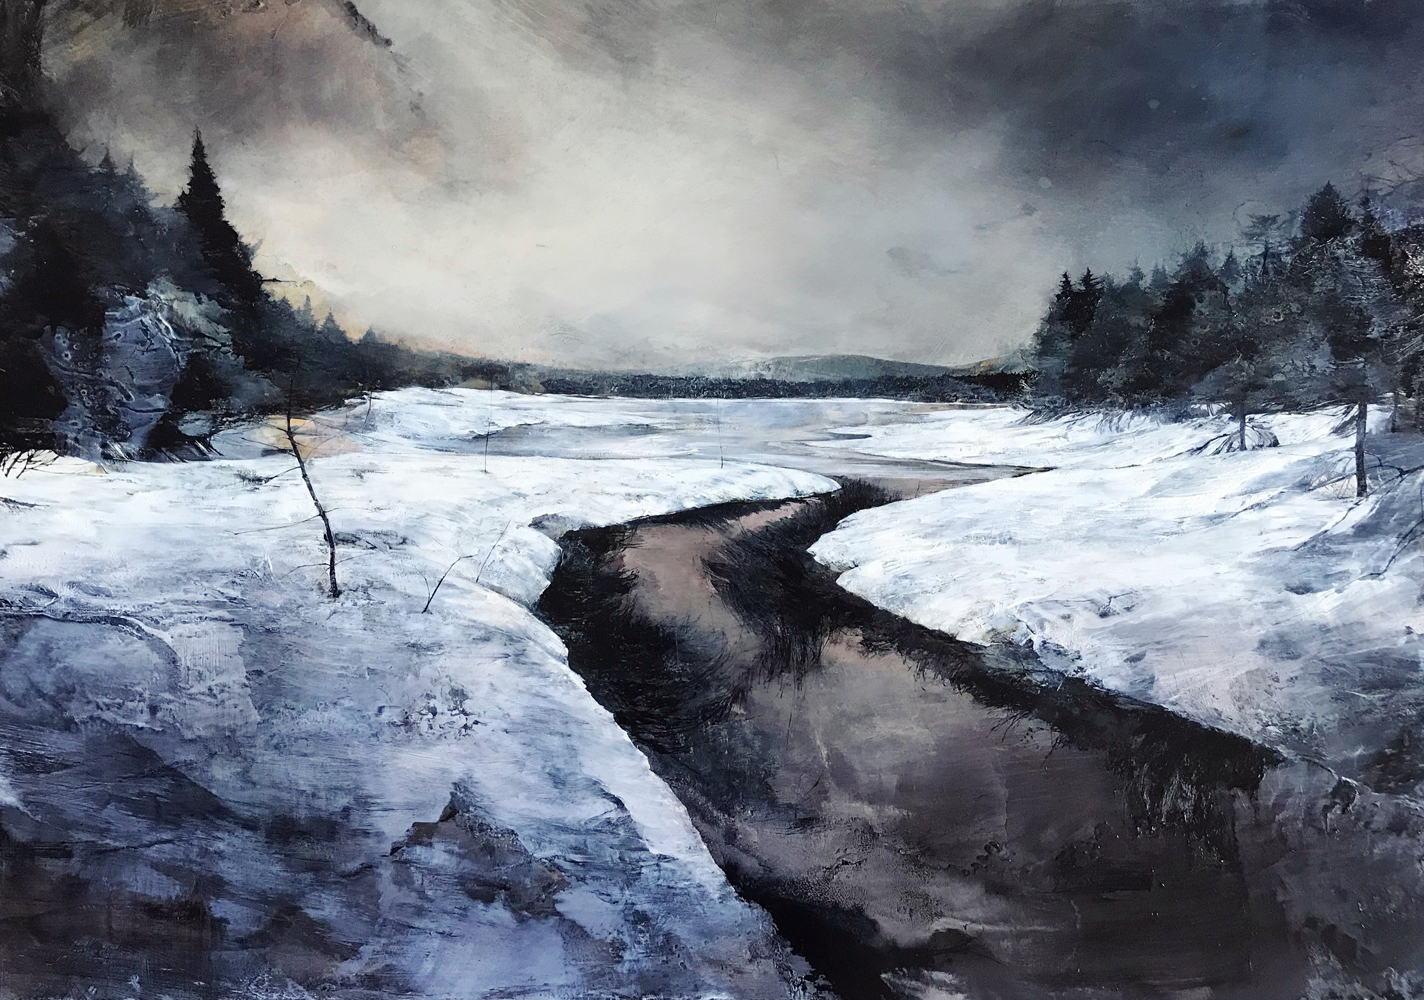 Mark Thompson, To Speak of Solitude, 2020, oil on panel, 34 x 48 inches, SOLD